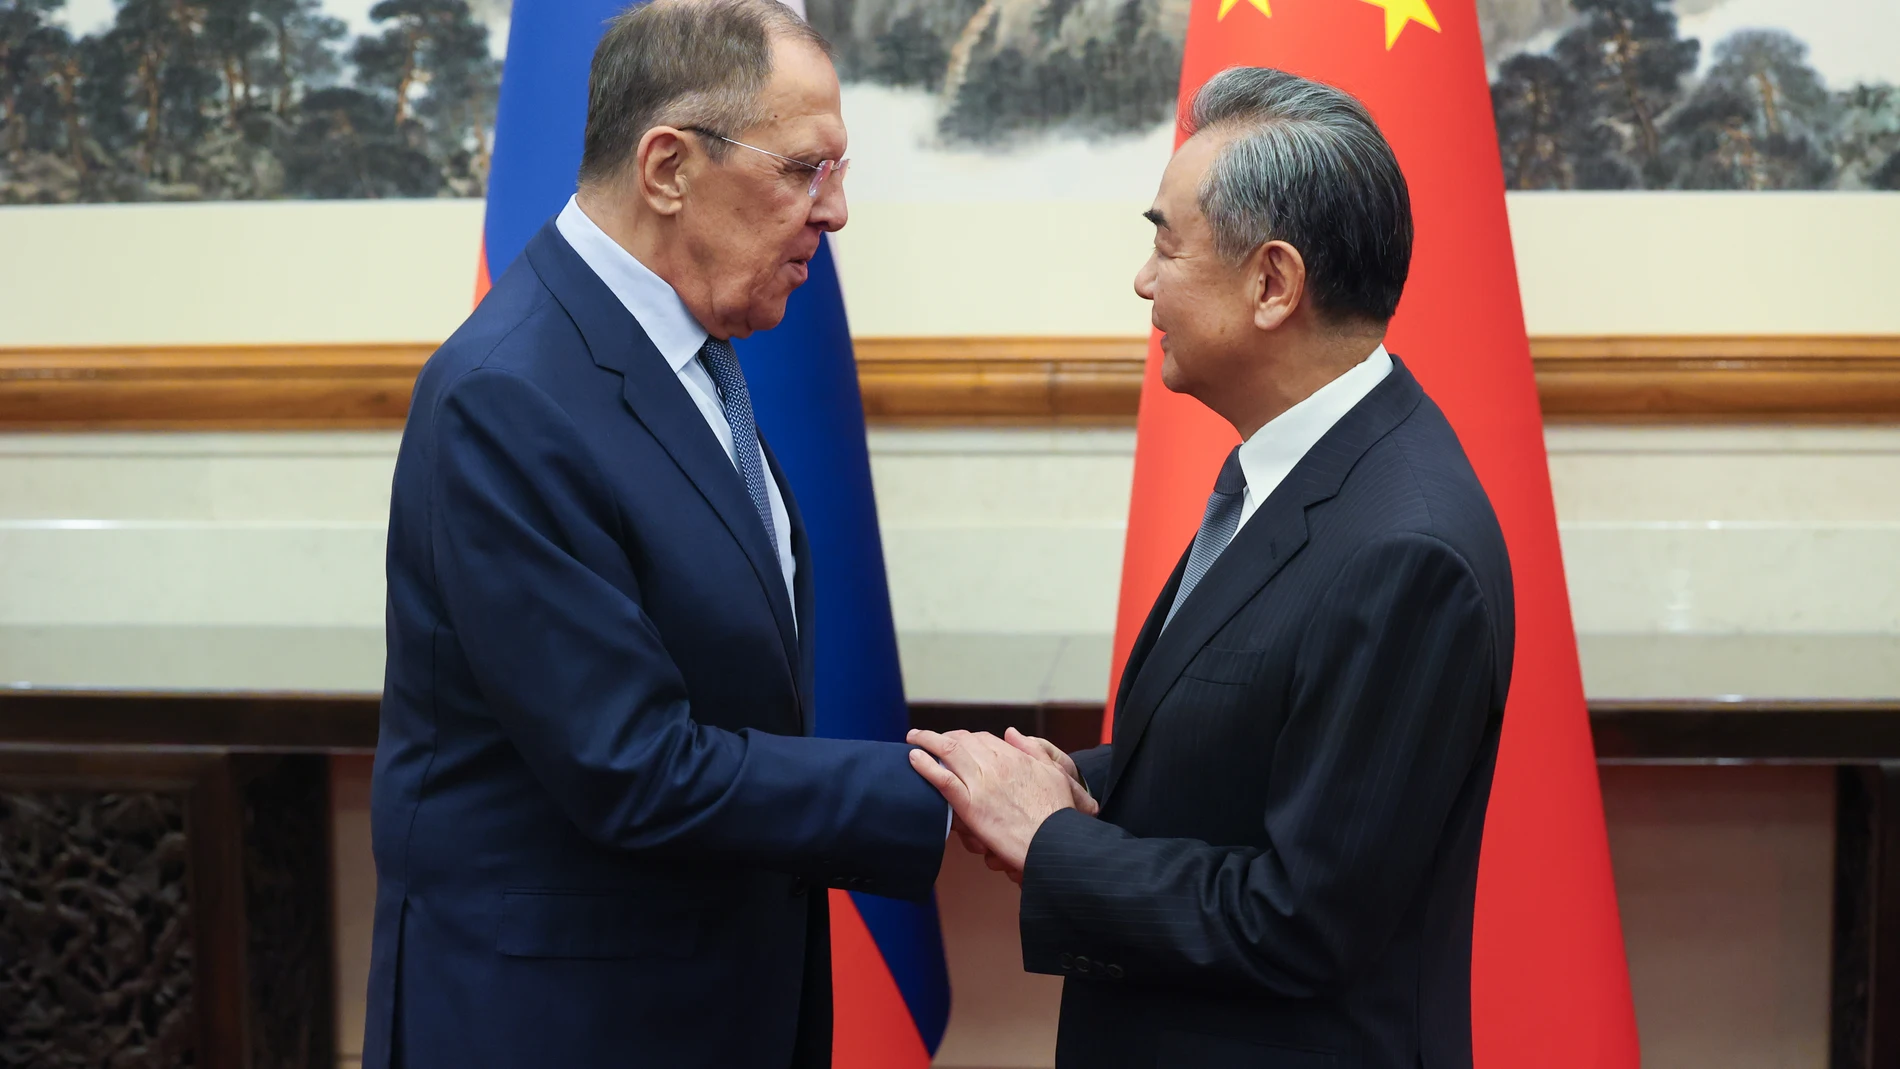 Beijing (China), 16/10/2023.- A handout photo made available by the Russian Foreign ministry press service shows Russian Foreign Minister, Sergei Lavrov (L), shaking hands with China's Foreign Minister, Wang Yi, during their meeting in Beijing, China, 16 October 2023. The Russian president will attend the Third Belt and Road Forum for International Cooperation, which will be held in Beijing on 17-18 October. As part of this trip, he plans to hold talks with the Chinese president. (Rusia) EFE/...